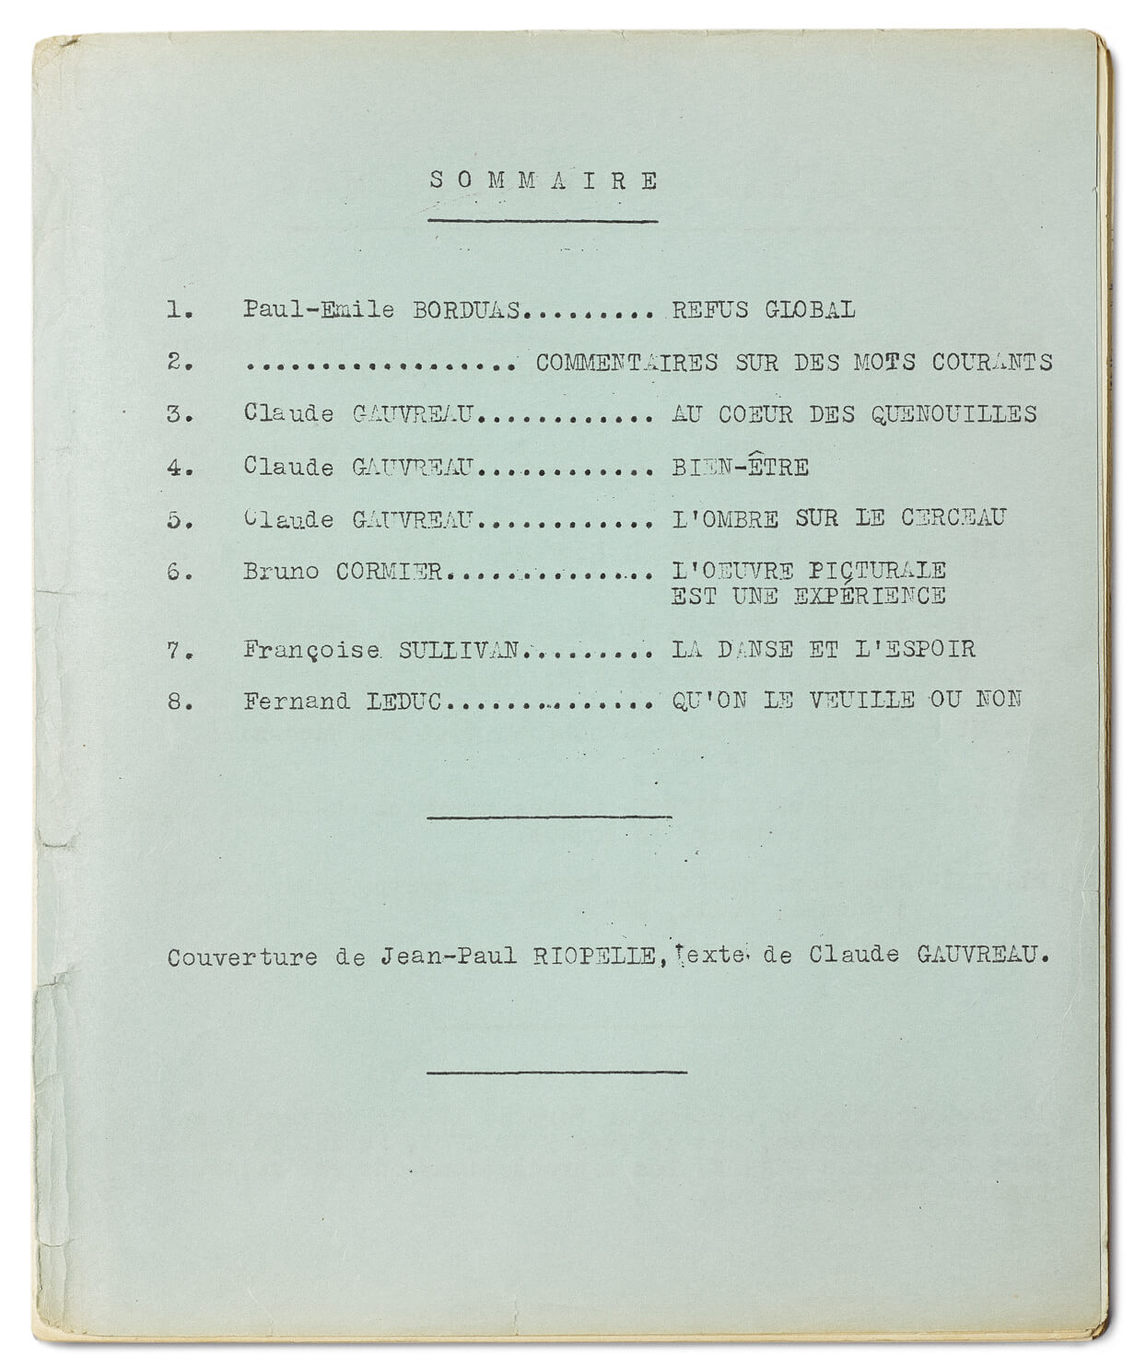 Refus global manifesto, table of contents, 1948.